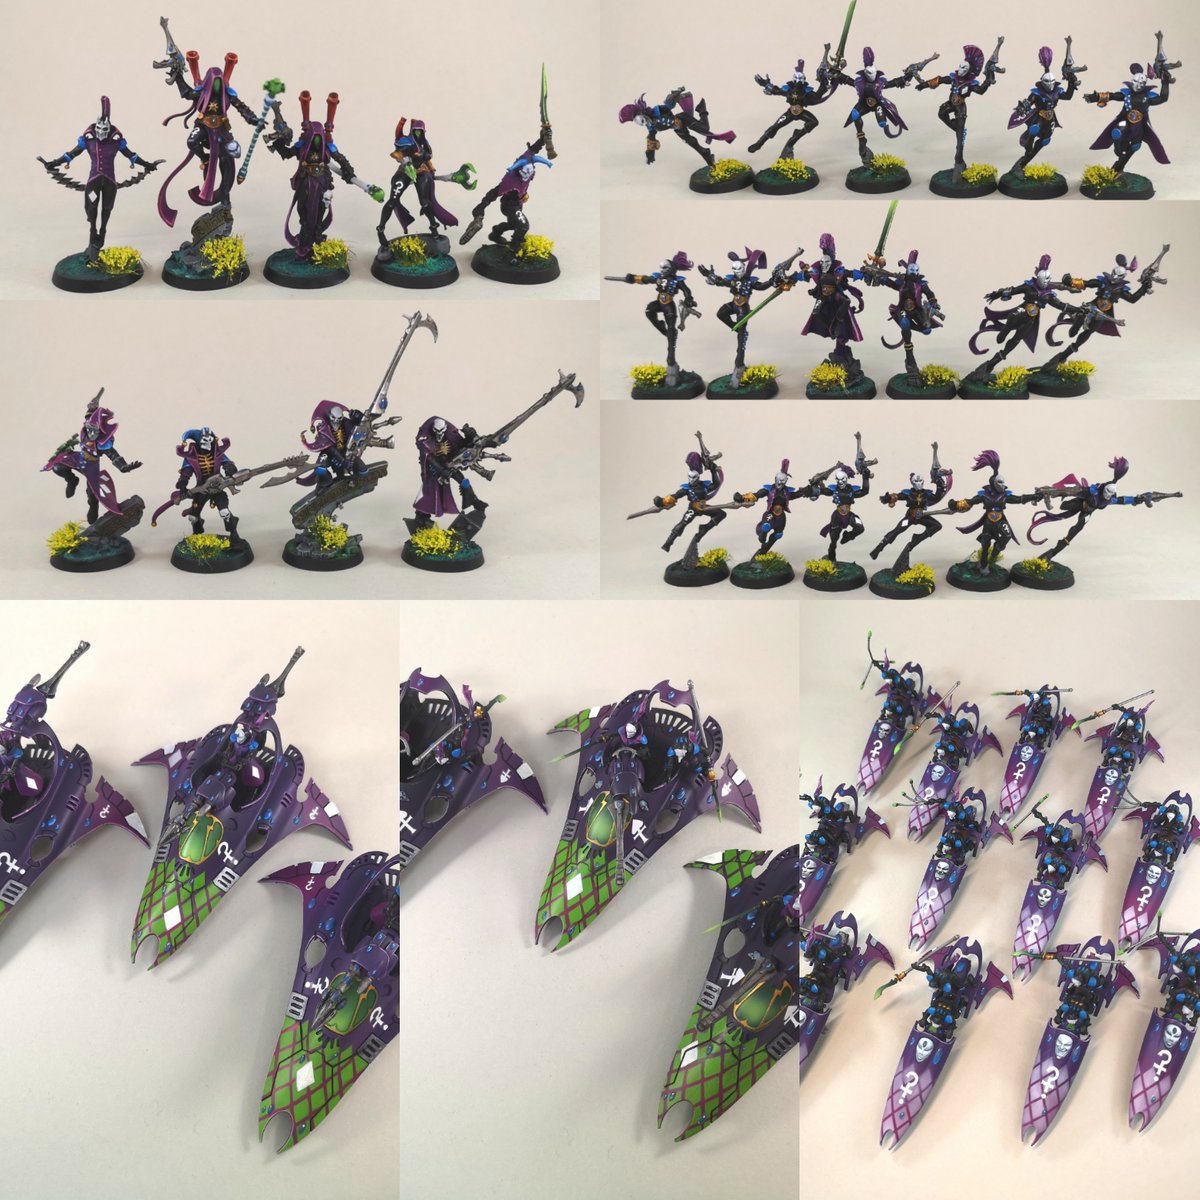 This week I've been adding detail to a Harlequins army which had already been neatly basecoated by another painter some time back - I've added edge highlights, gems, decals and diamonds ♦️🎭 #miniaturepainting #wargaming #wh40k #WarhammerCommunity #wepaintminis #commissionsopen